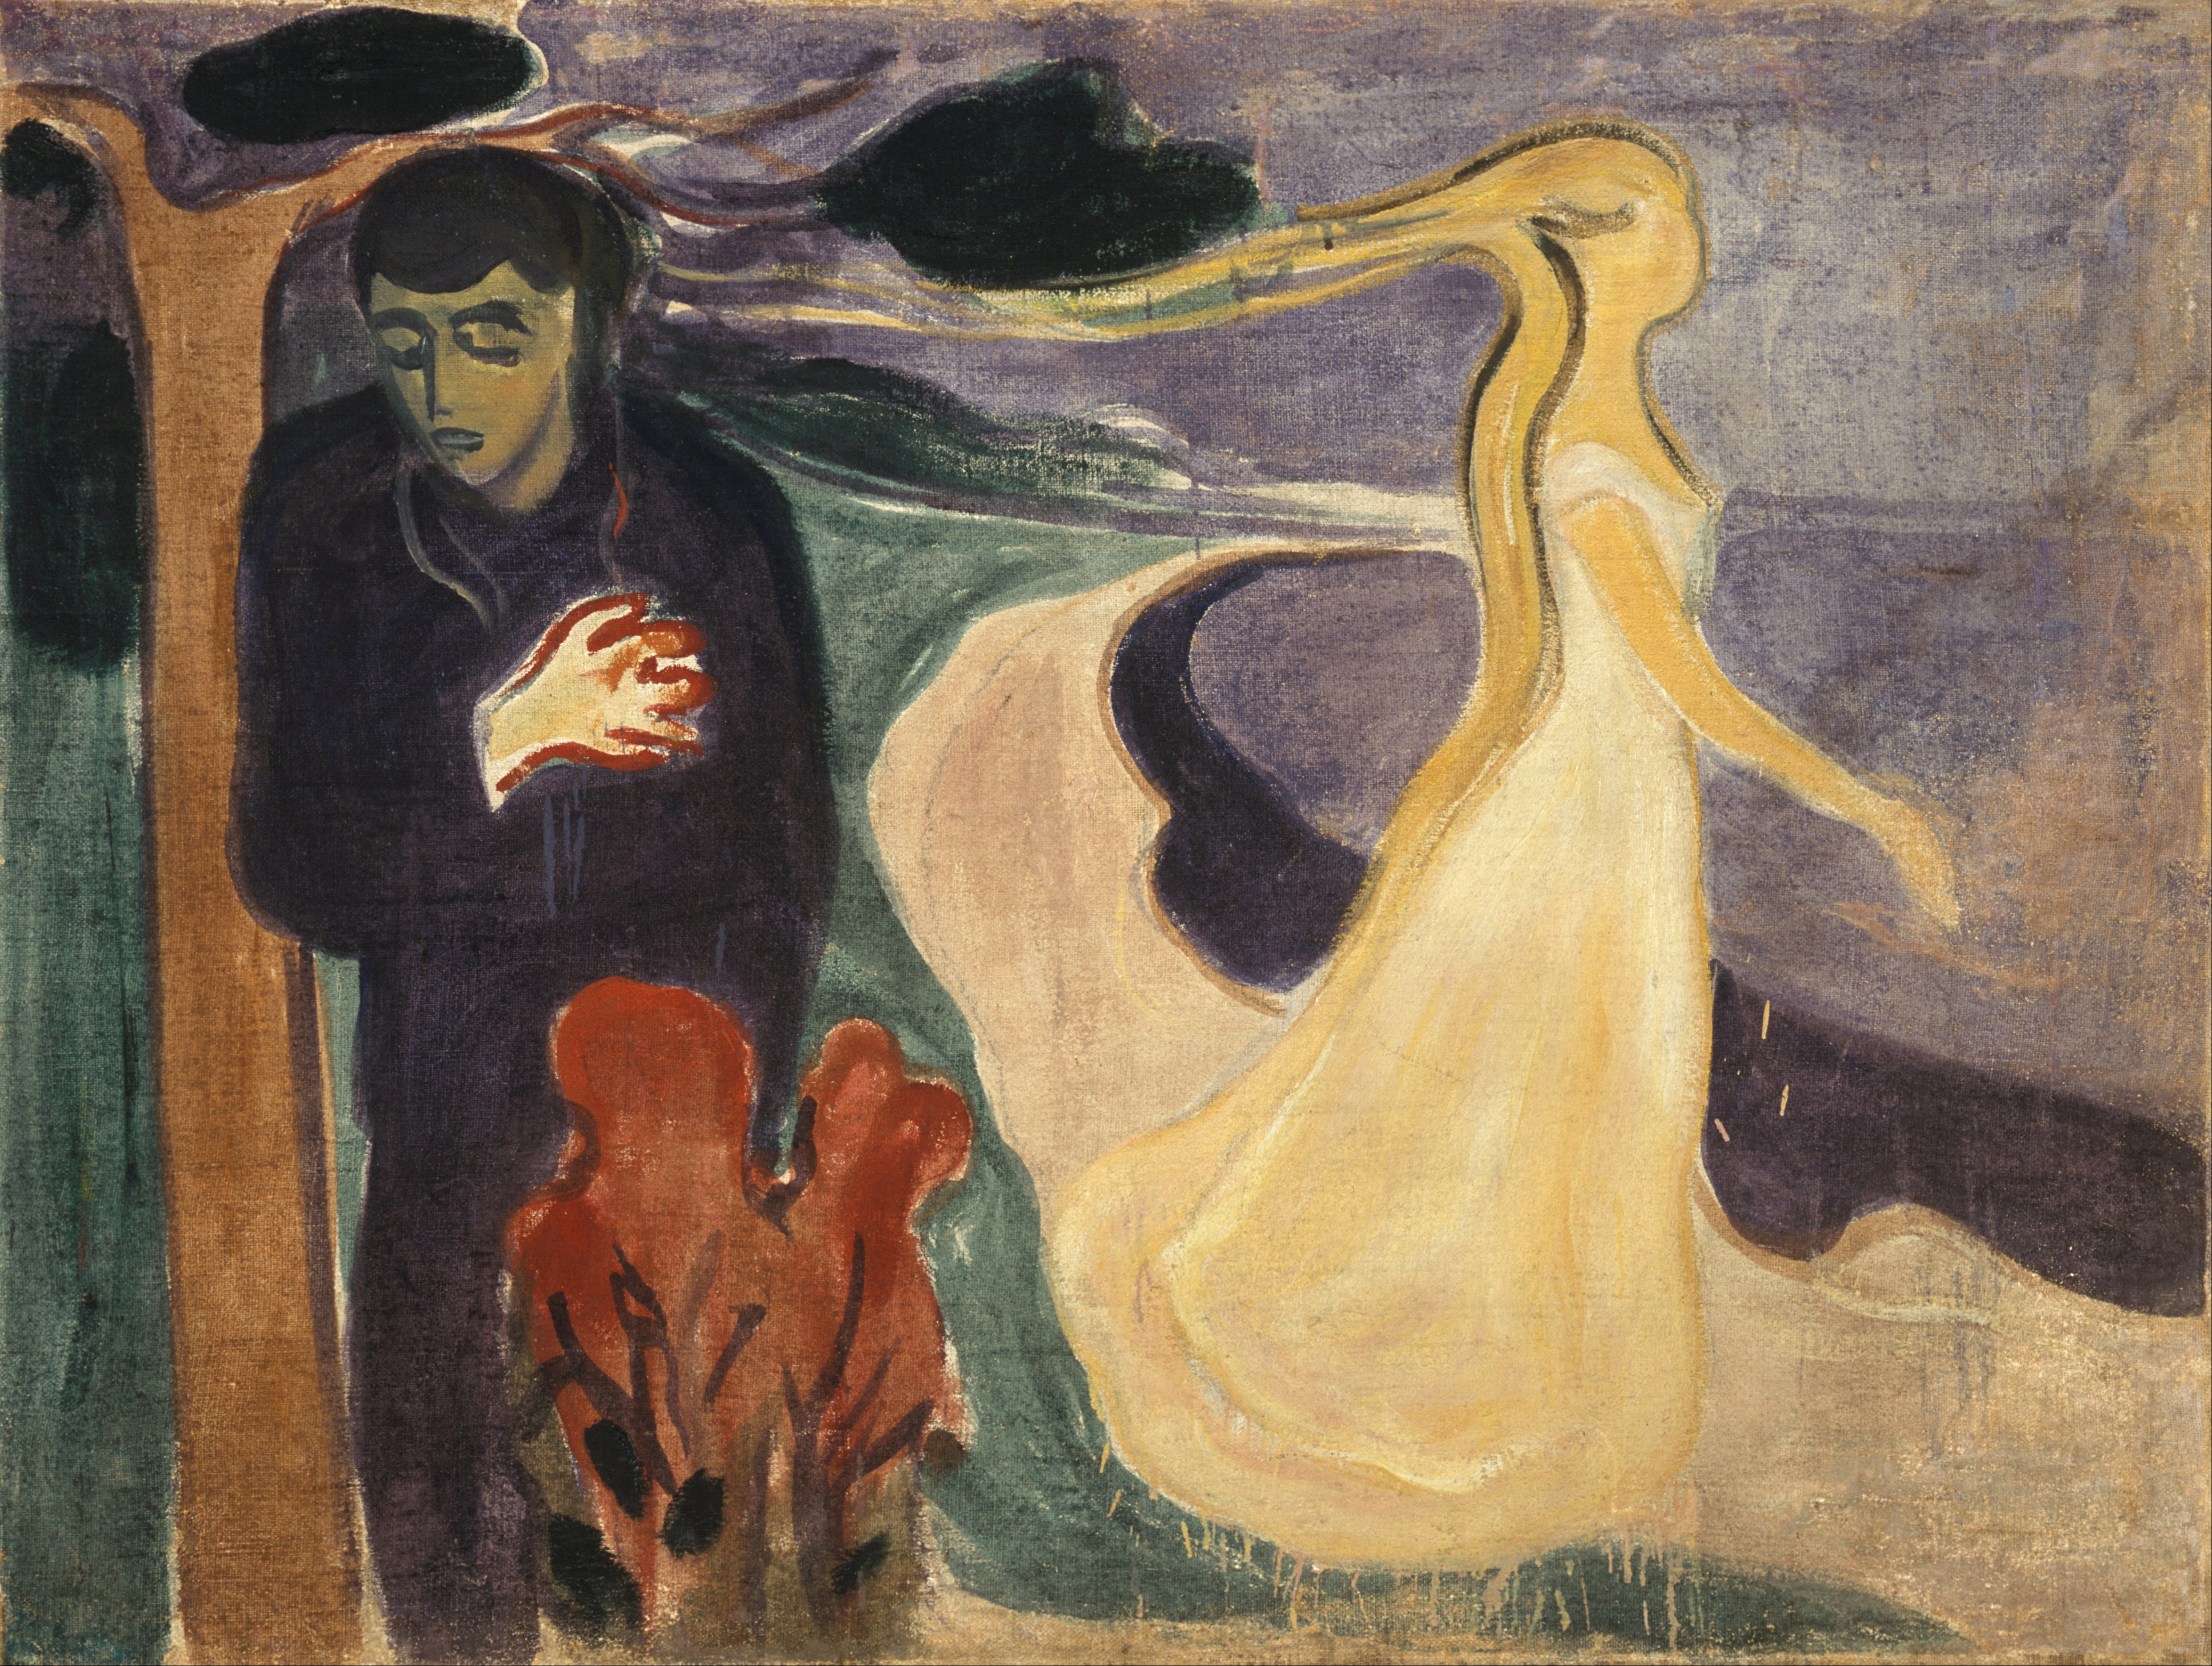 Separation, painting by Edward Munch